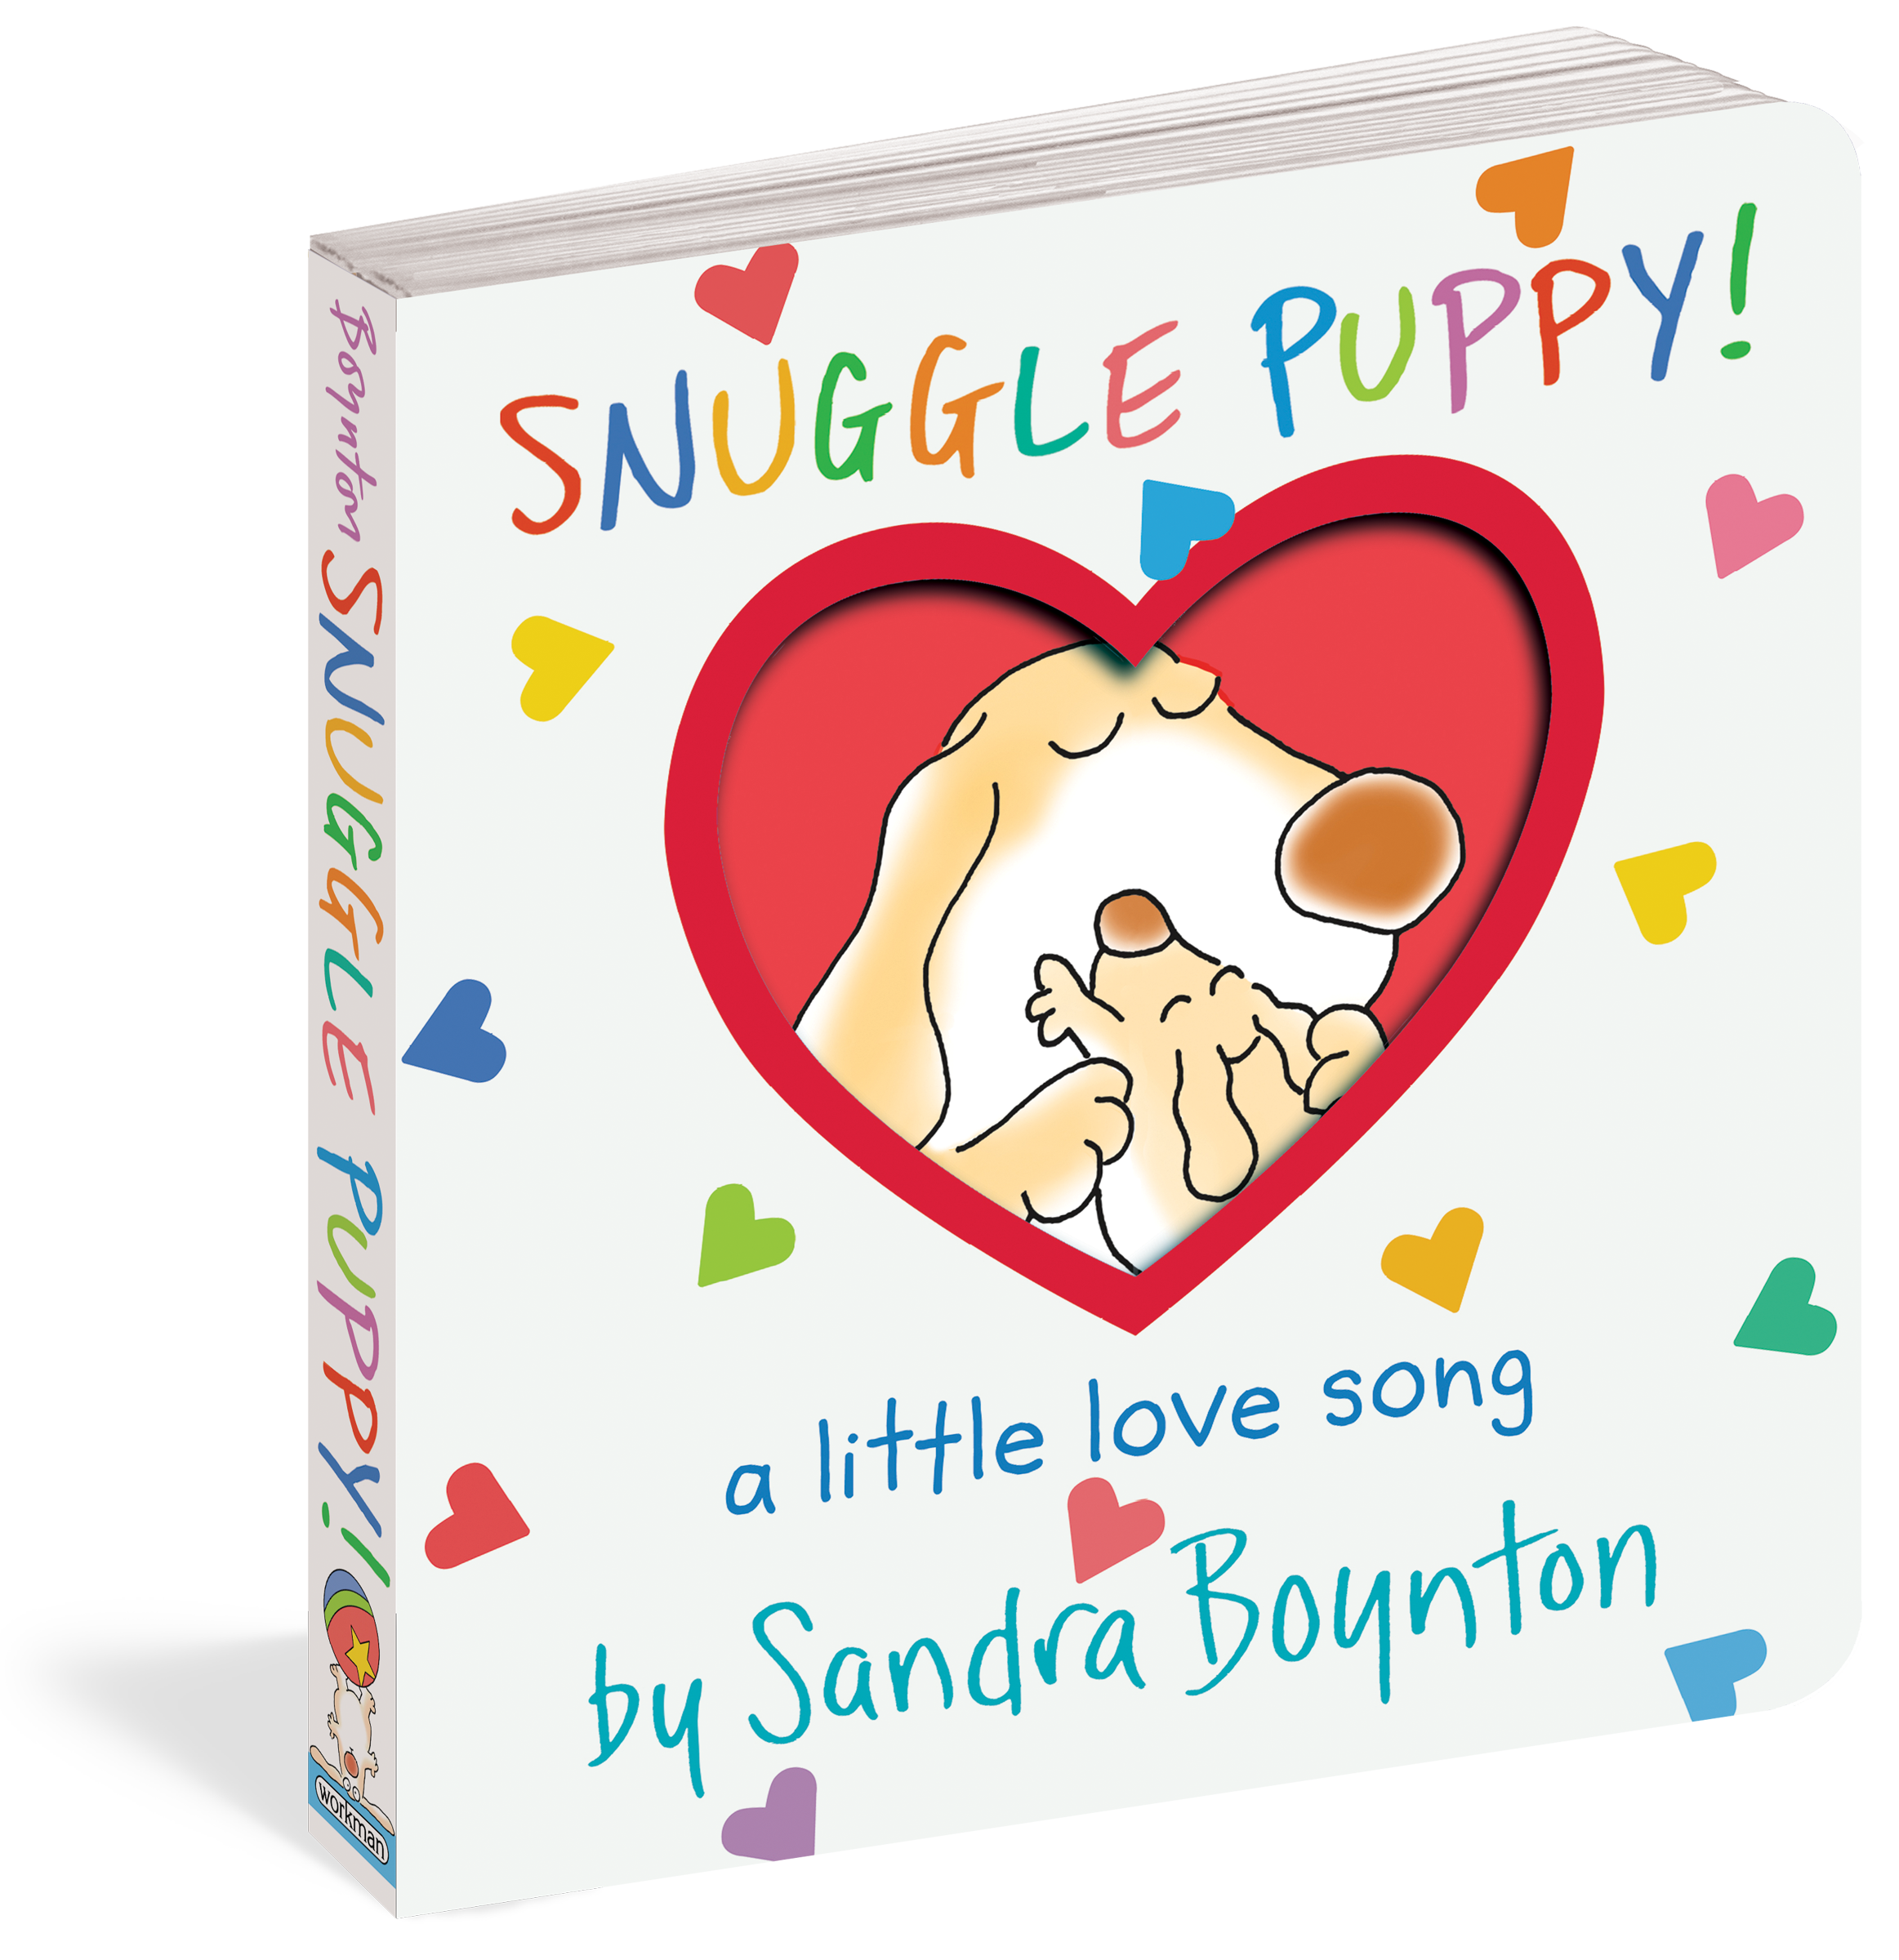 Snuggle Puppy! - A Little Love Song    